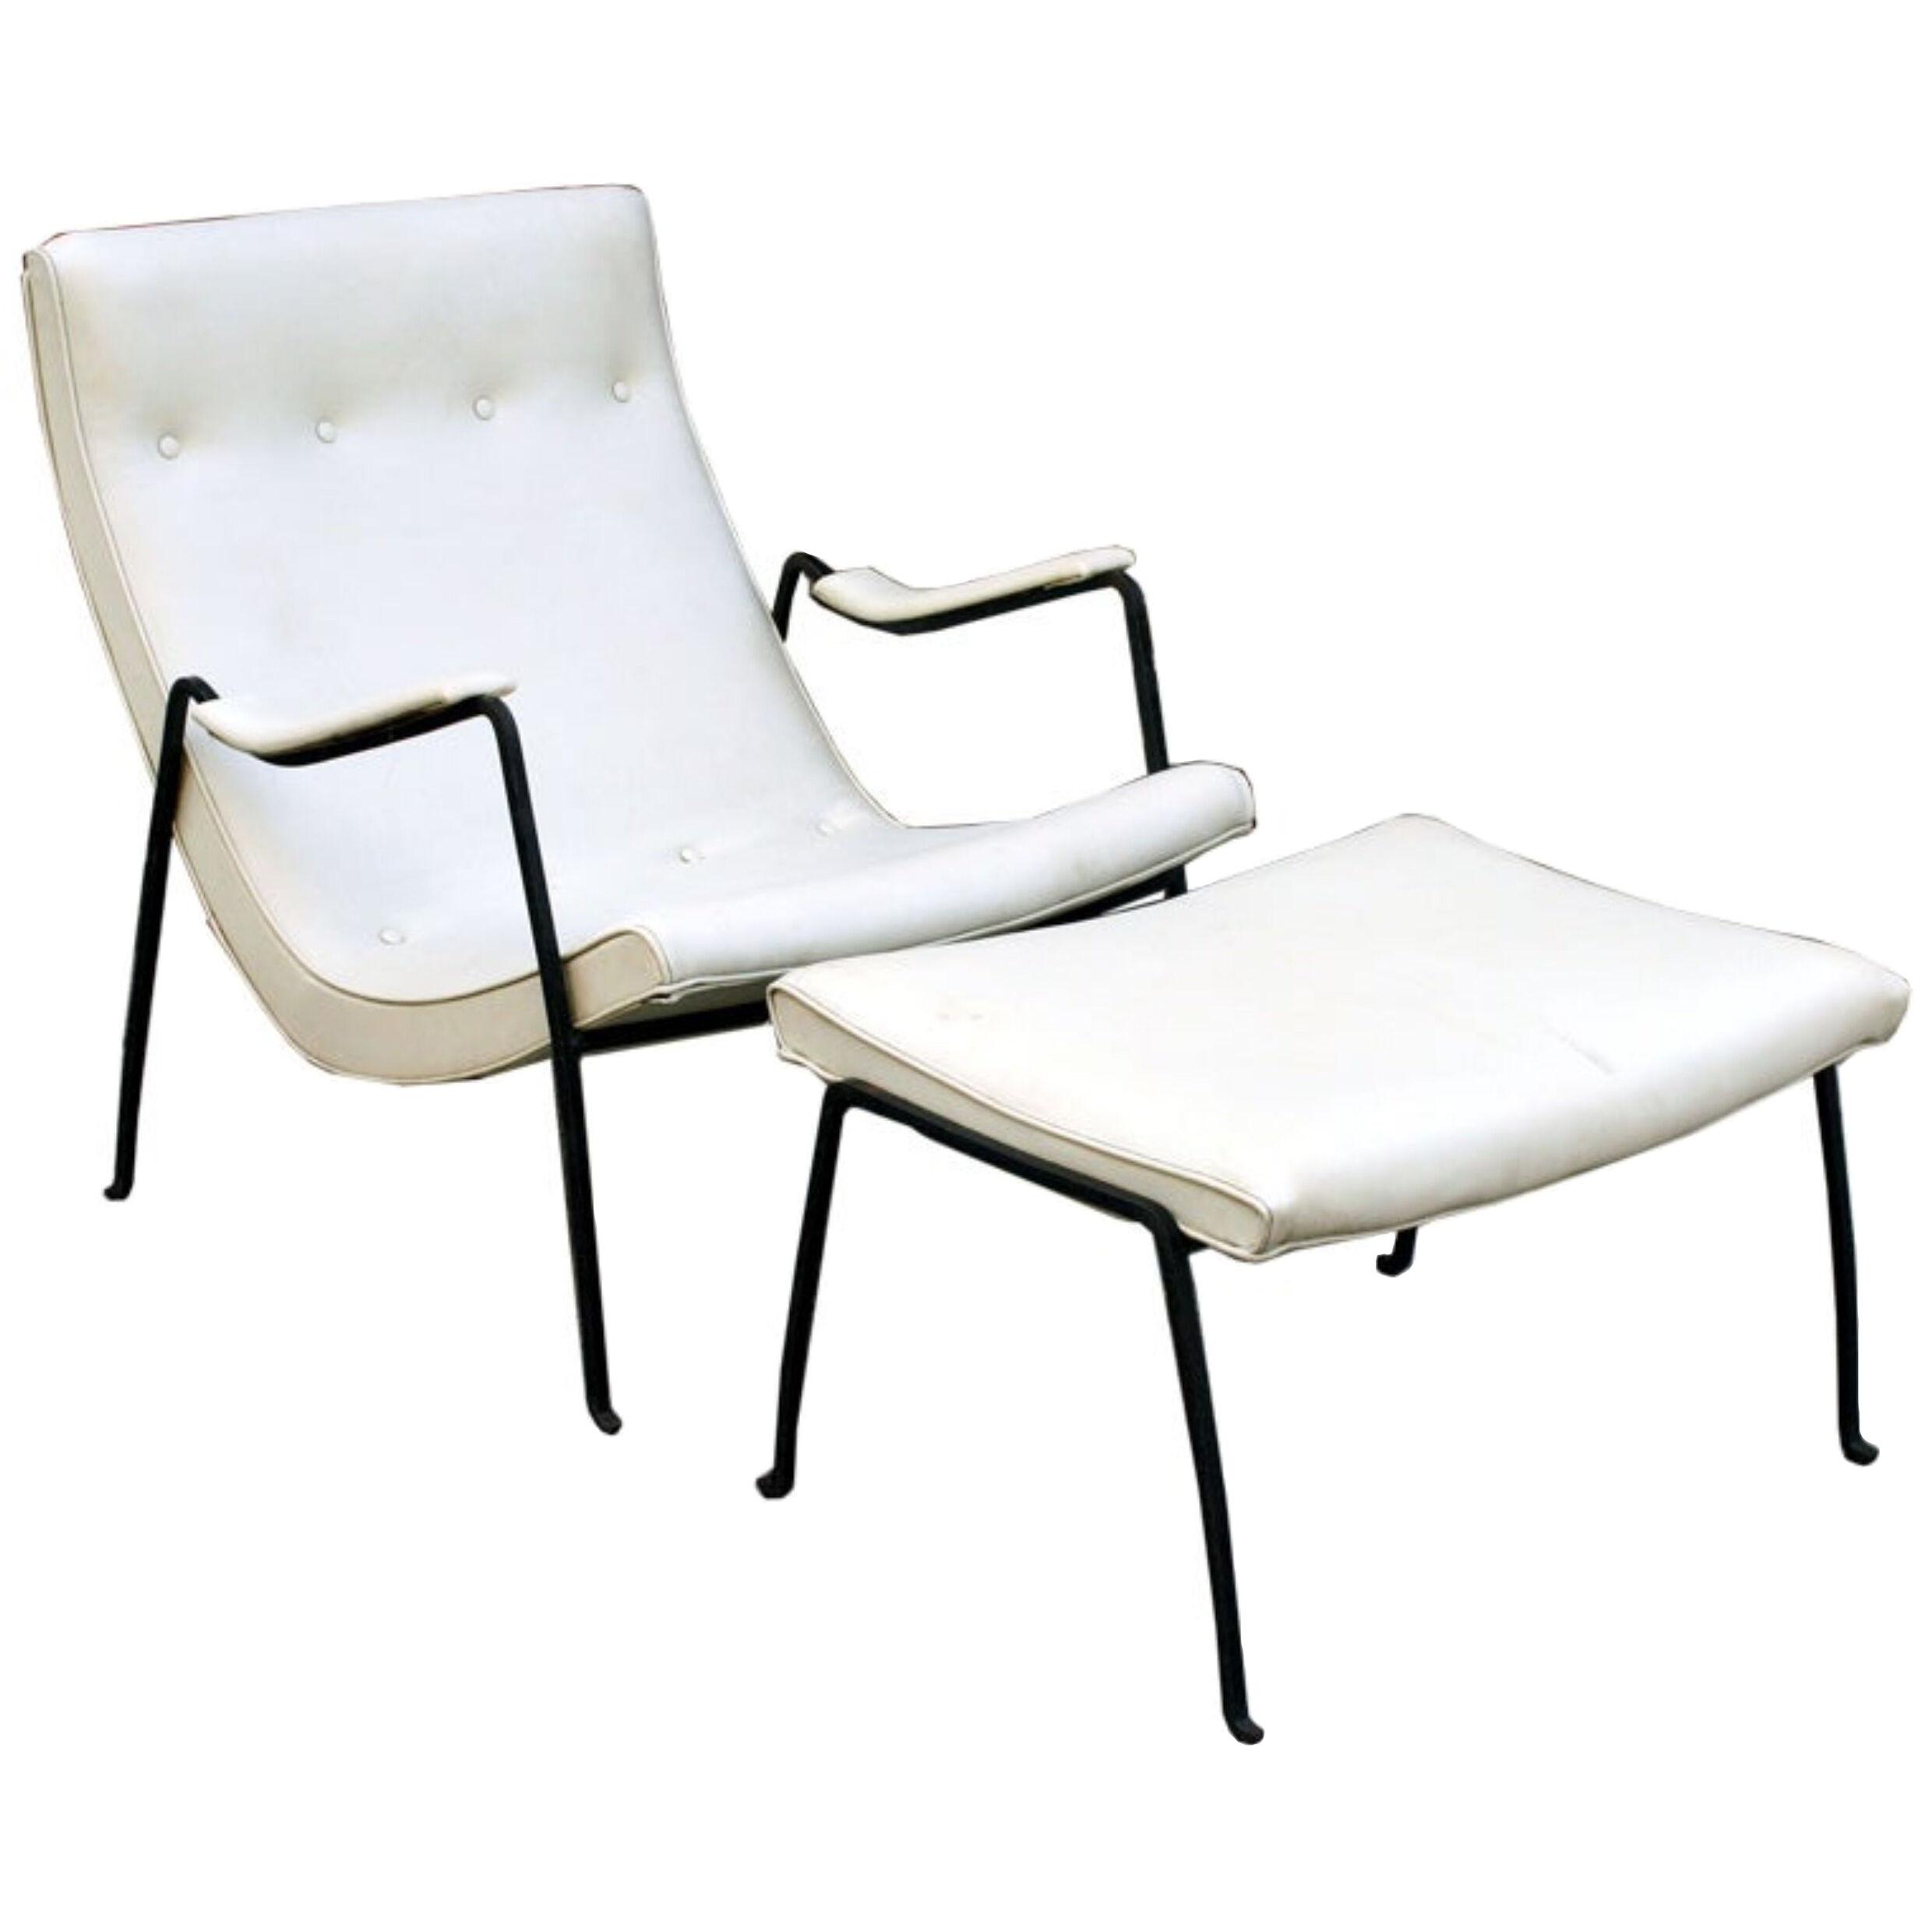 Wrought Iron Frame Scoop Chair and Ottoman by Milo Baughman